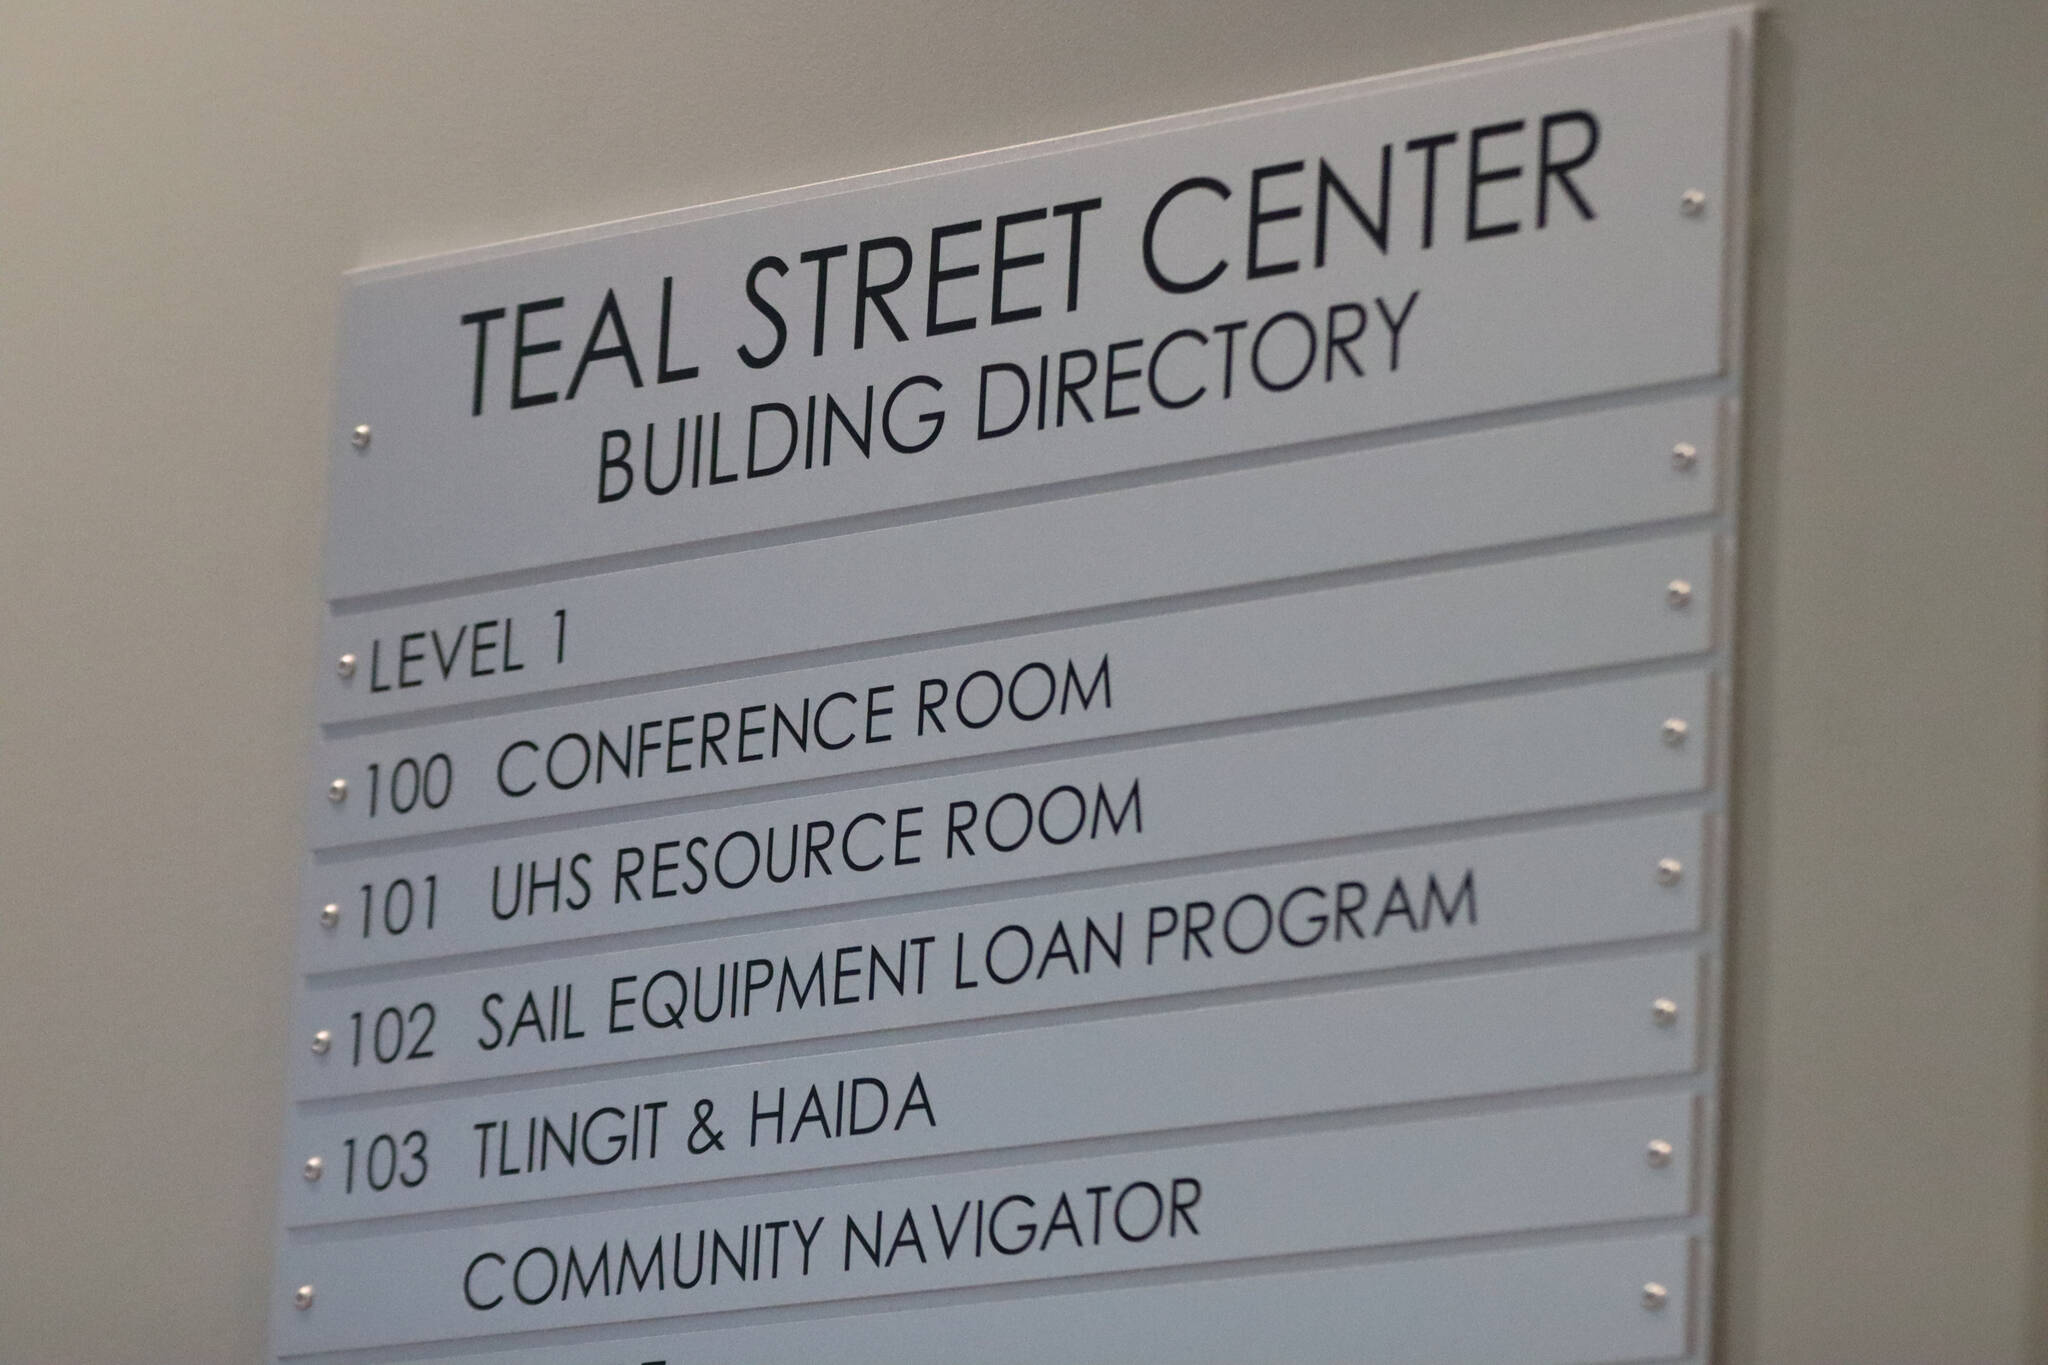 A building directory located inside the lobby shows the wide arrange of different social services offered through the Teal Street Center. The center is designed to be a convenient one stop location for those in need. (Jonson Kuhn / Juneau Empire)